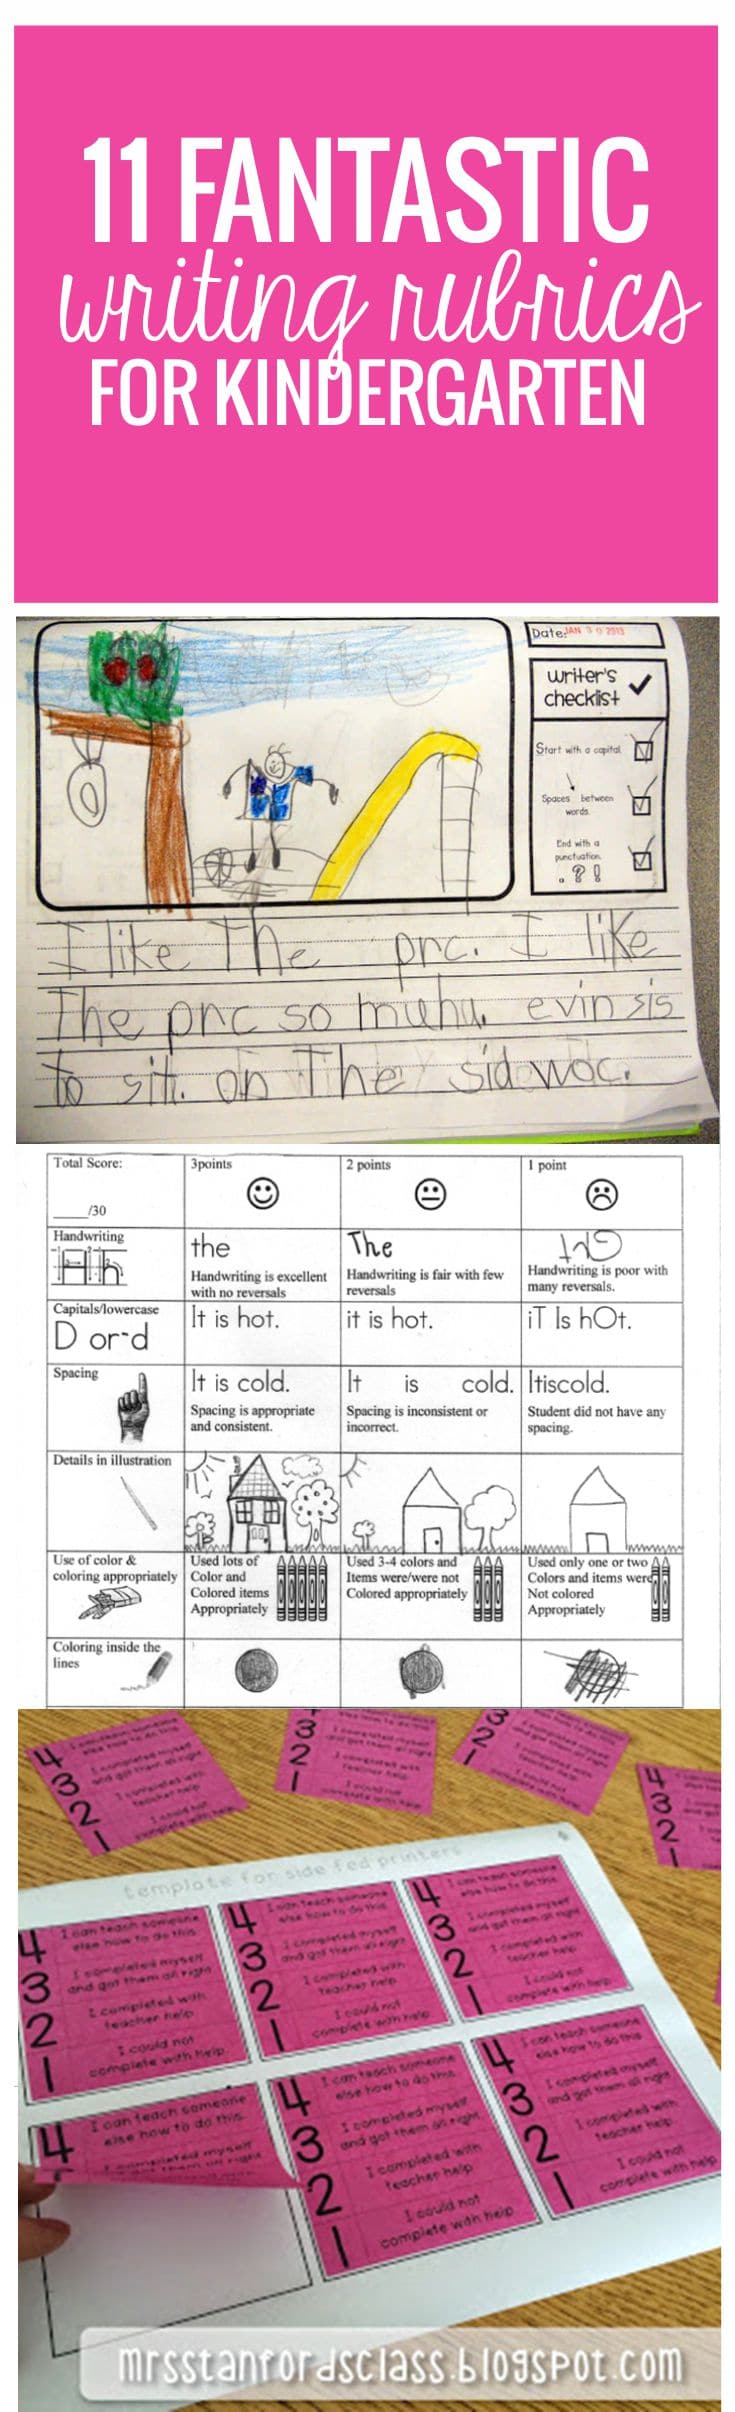 11 Fantastic Writing Rubrics for Kindergarten - all free - these are great